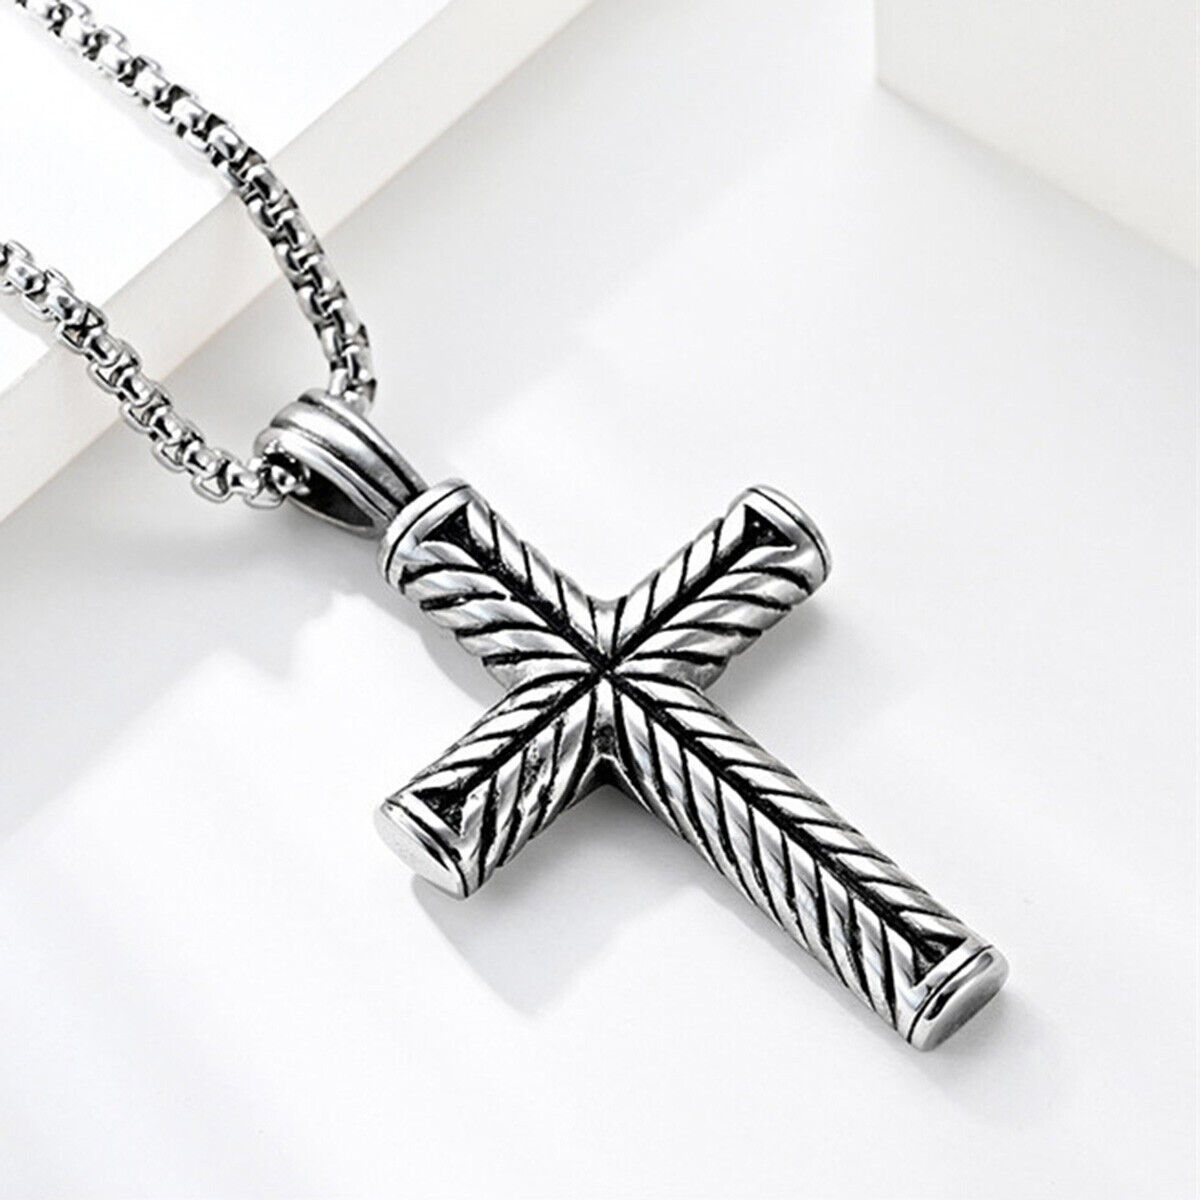 Men Women Vintage Crufifix Cross Charm Pendant Necklace Stainless Steel Silver